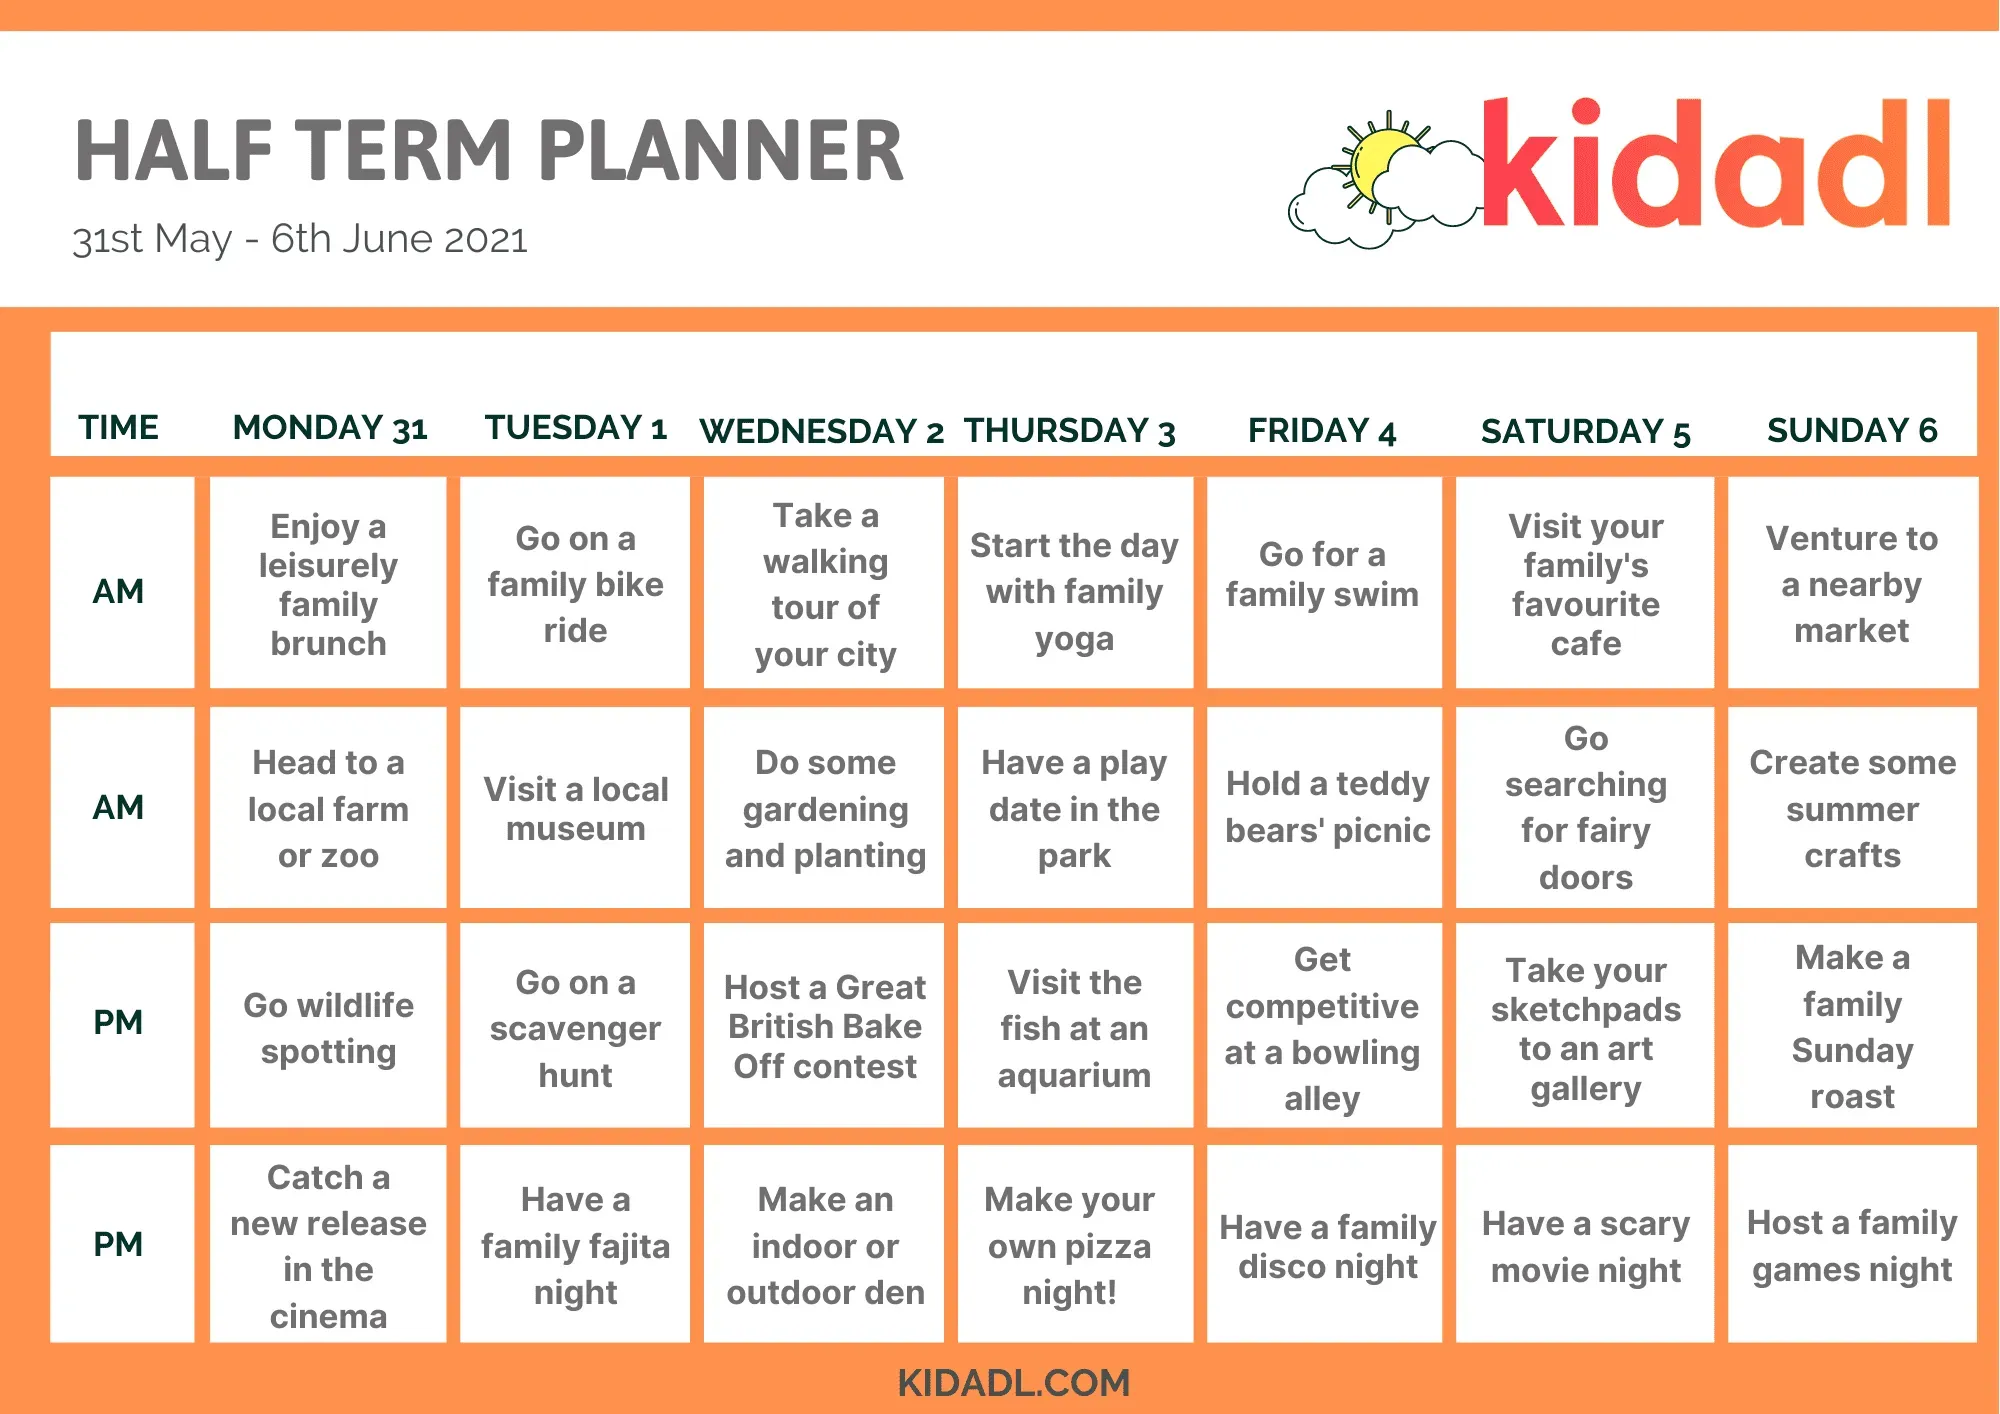 Half term planner for the month of June 2021